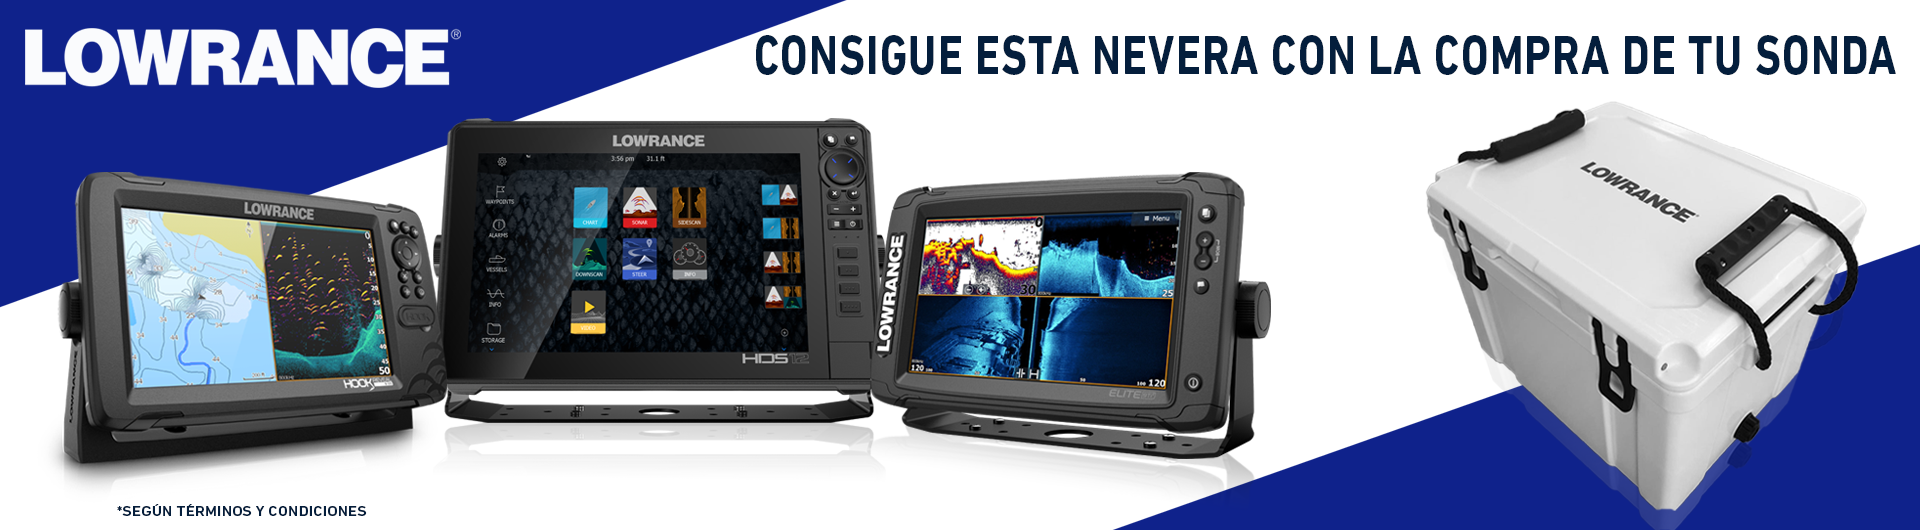 BANNER Lowrance NEVERA-Ver06.png